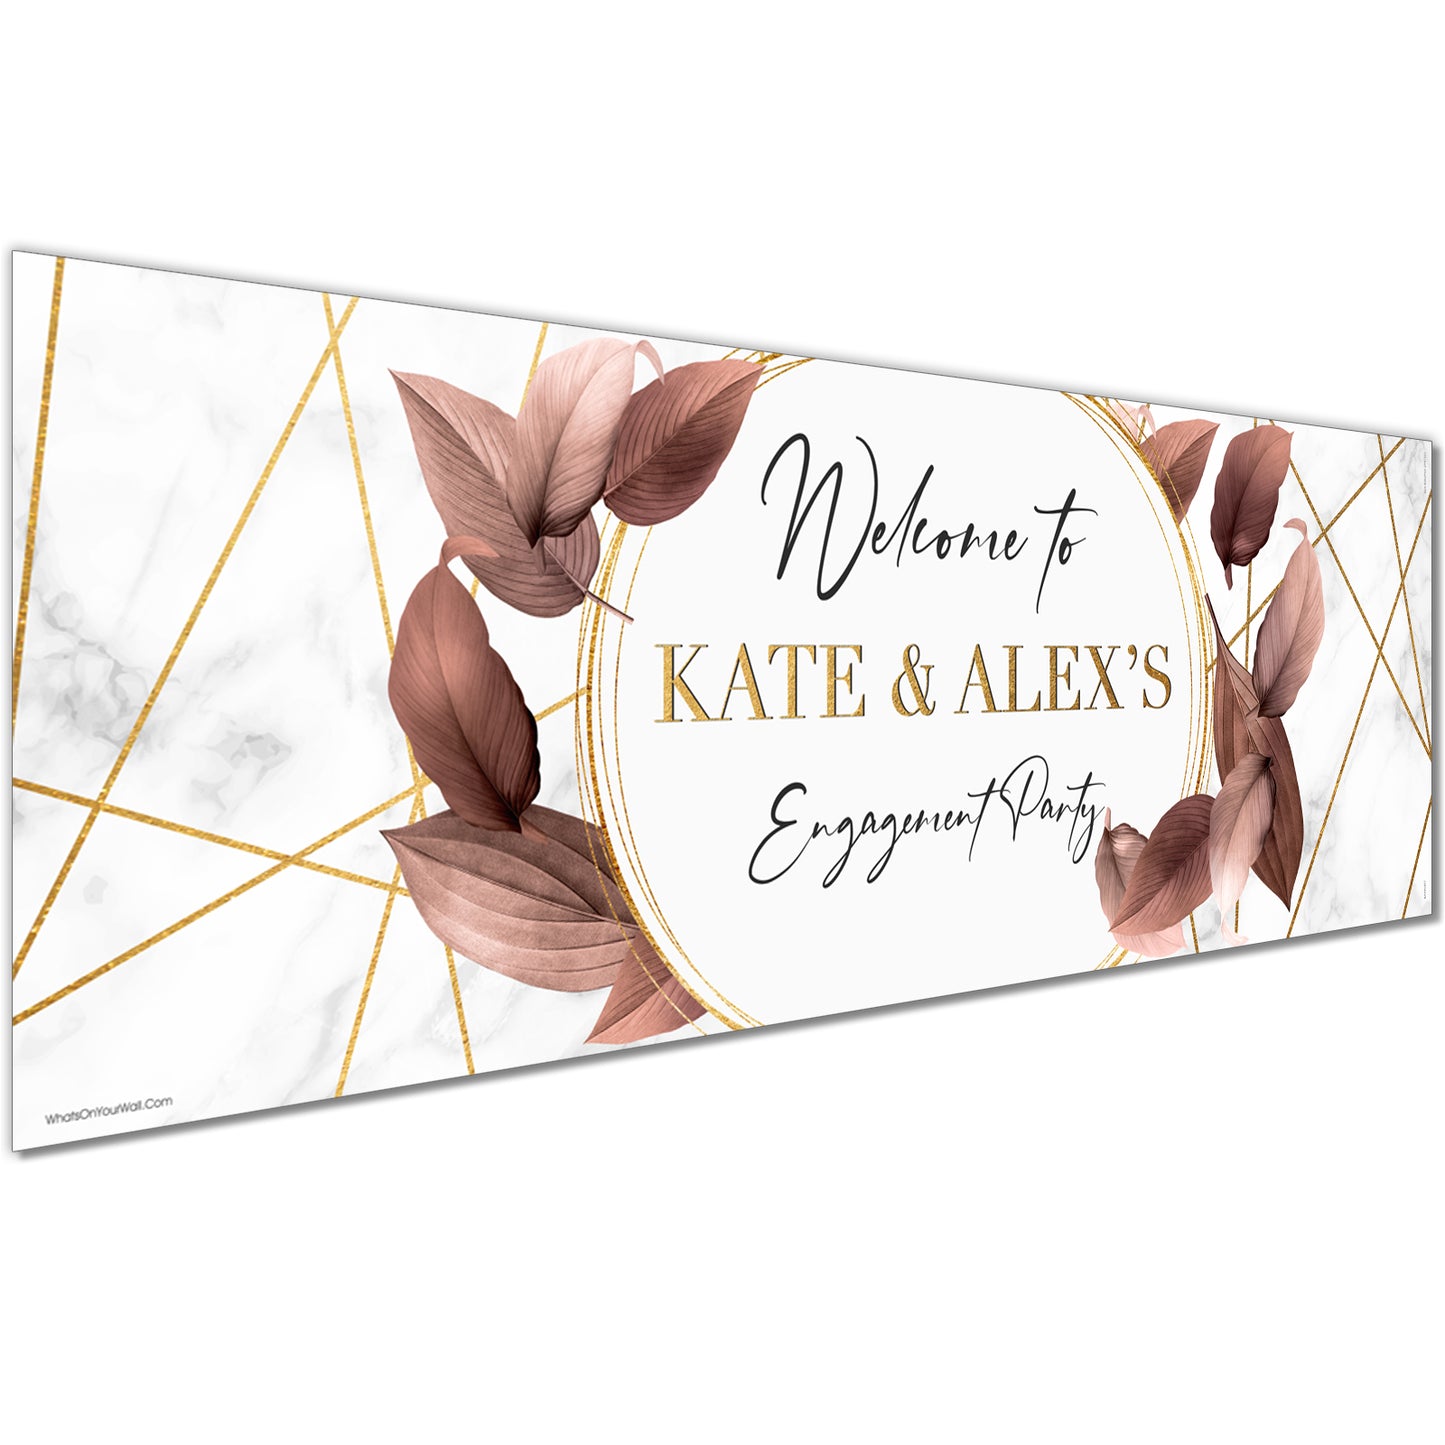 Personalised Engagement Banners in Gold White Design